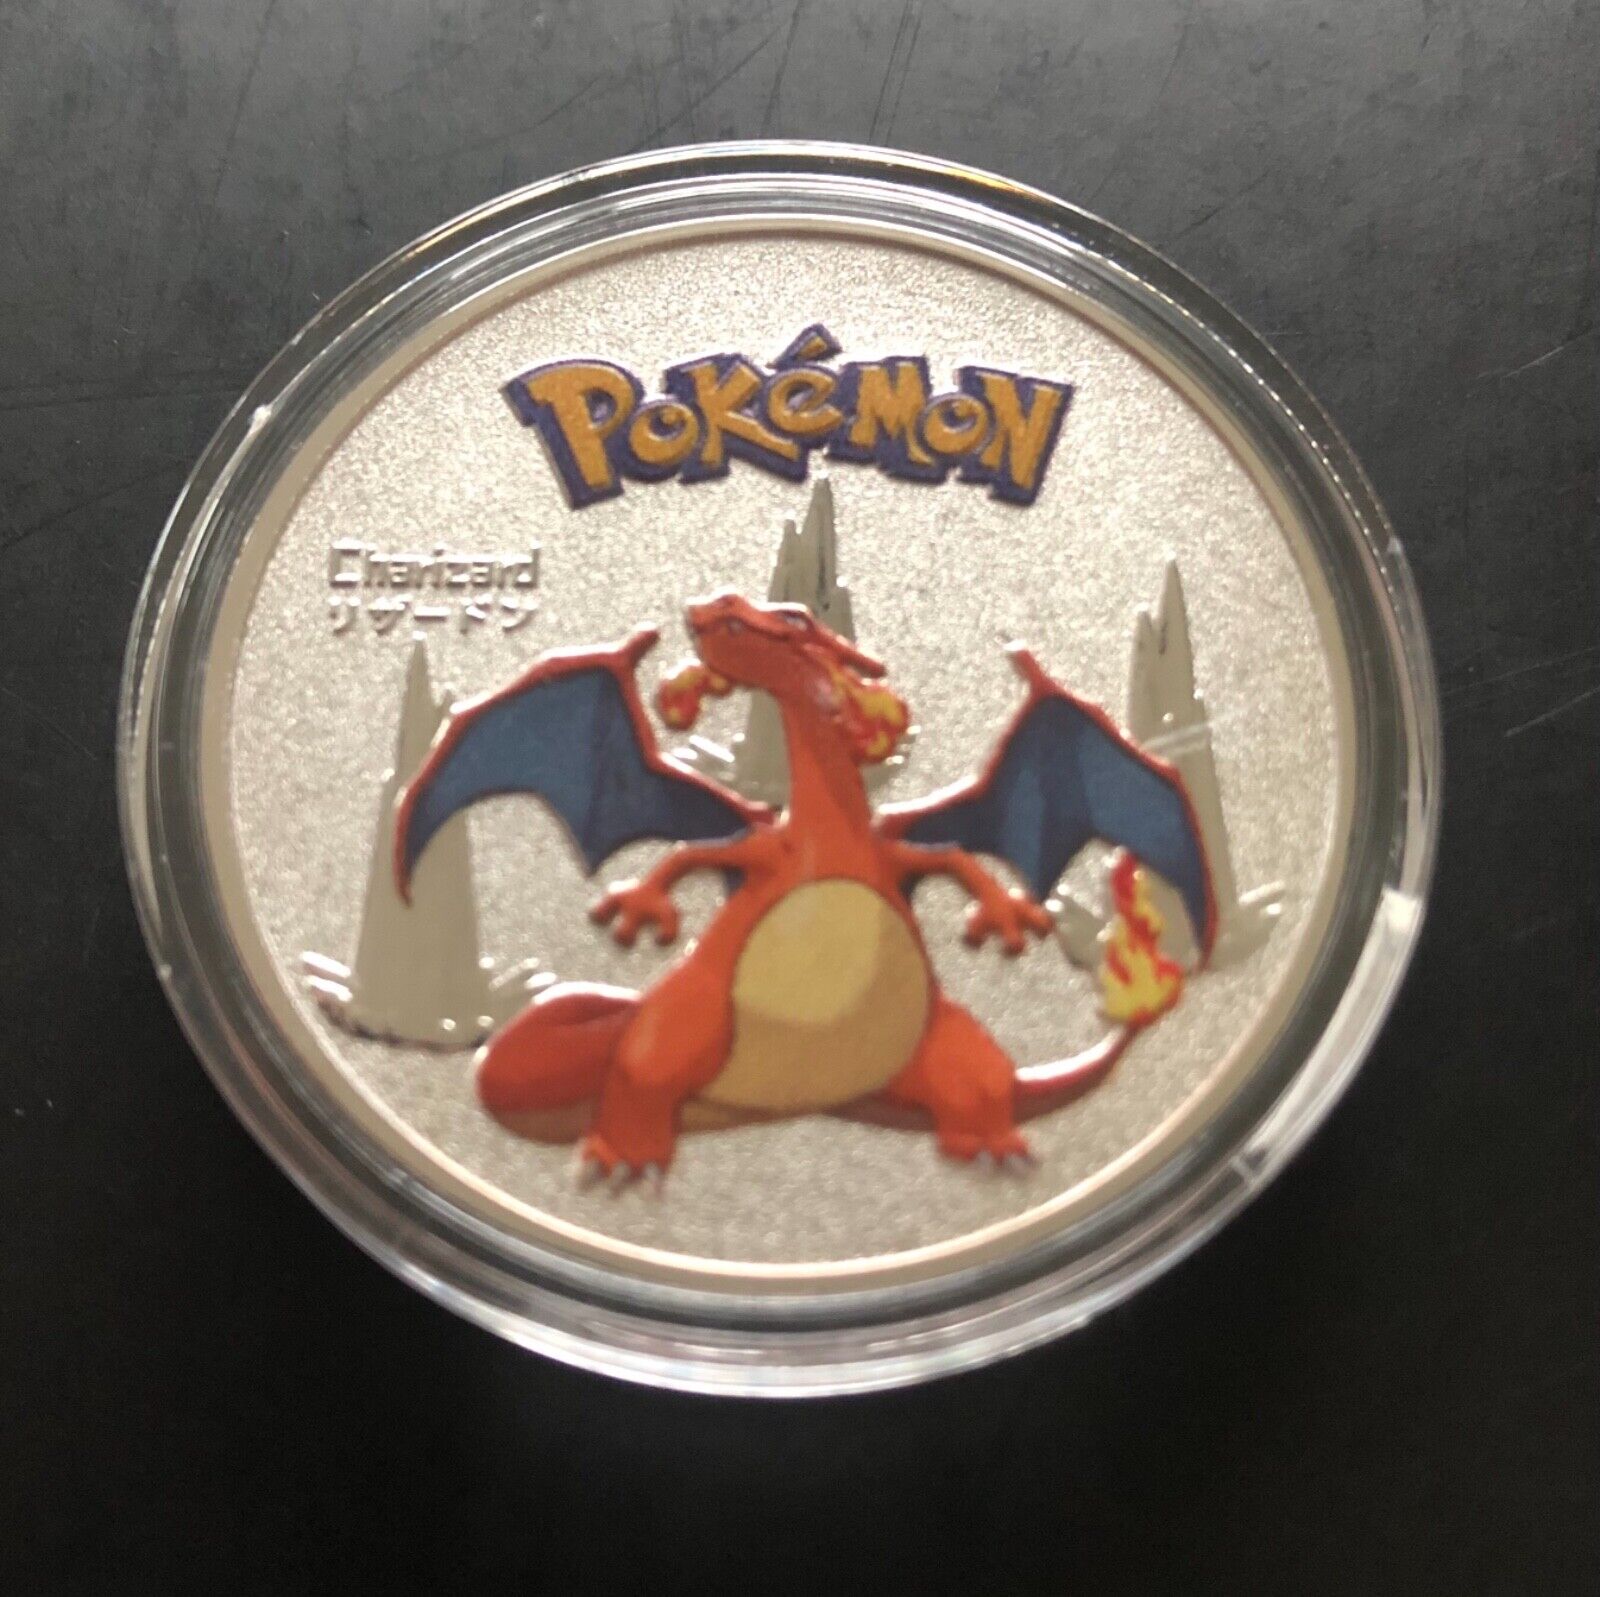 Pokemon Gold And Silver Collectable Coins - Charizard Mewtwo - Rare Coin Bundle